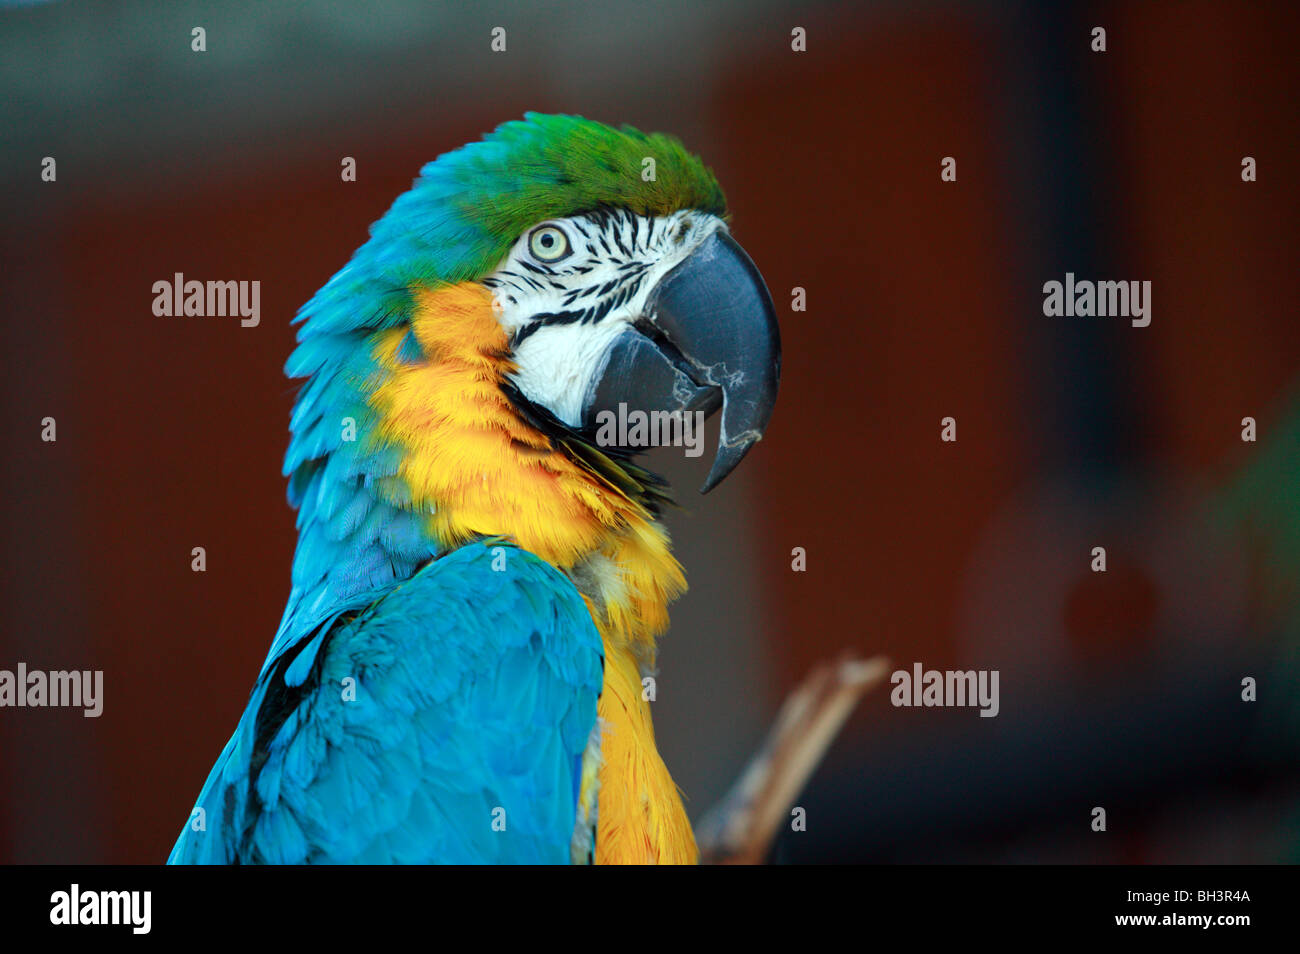 Close-up image of a Blue and Gold Macaw at the Cougar Mountain Zoological Park, Issaquah, Washington, USA Stock Photo